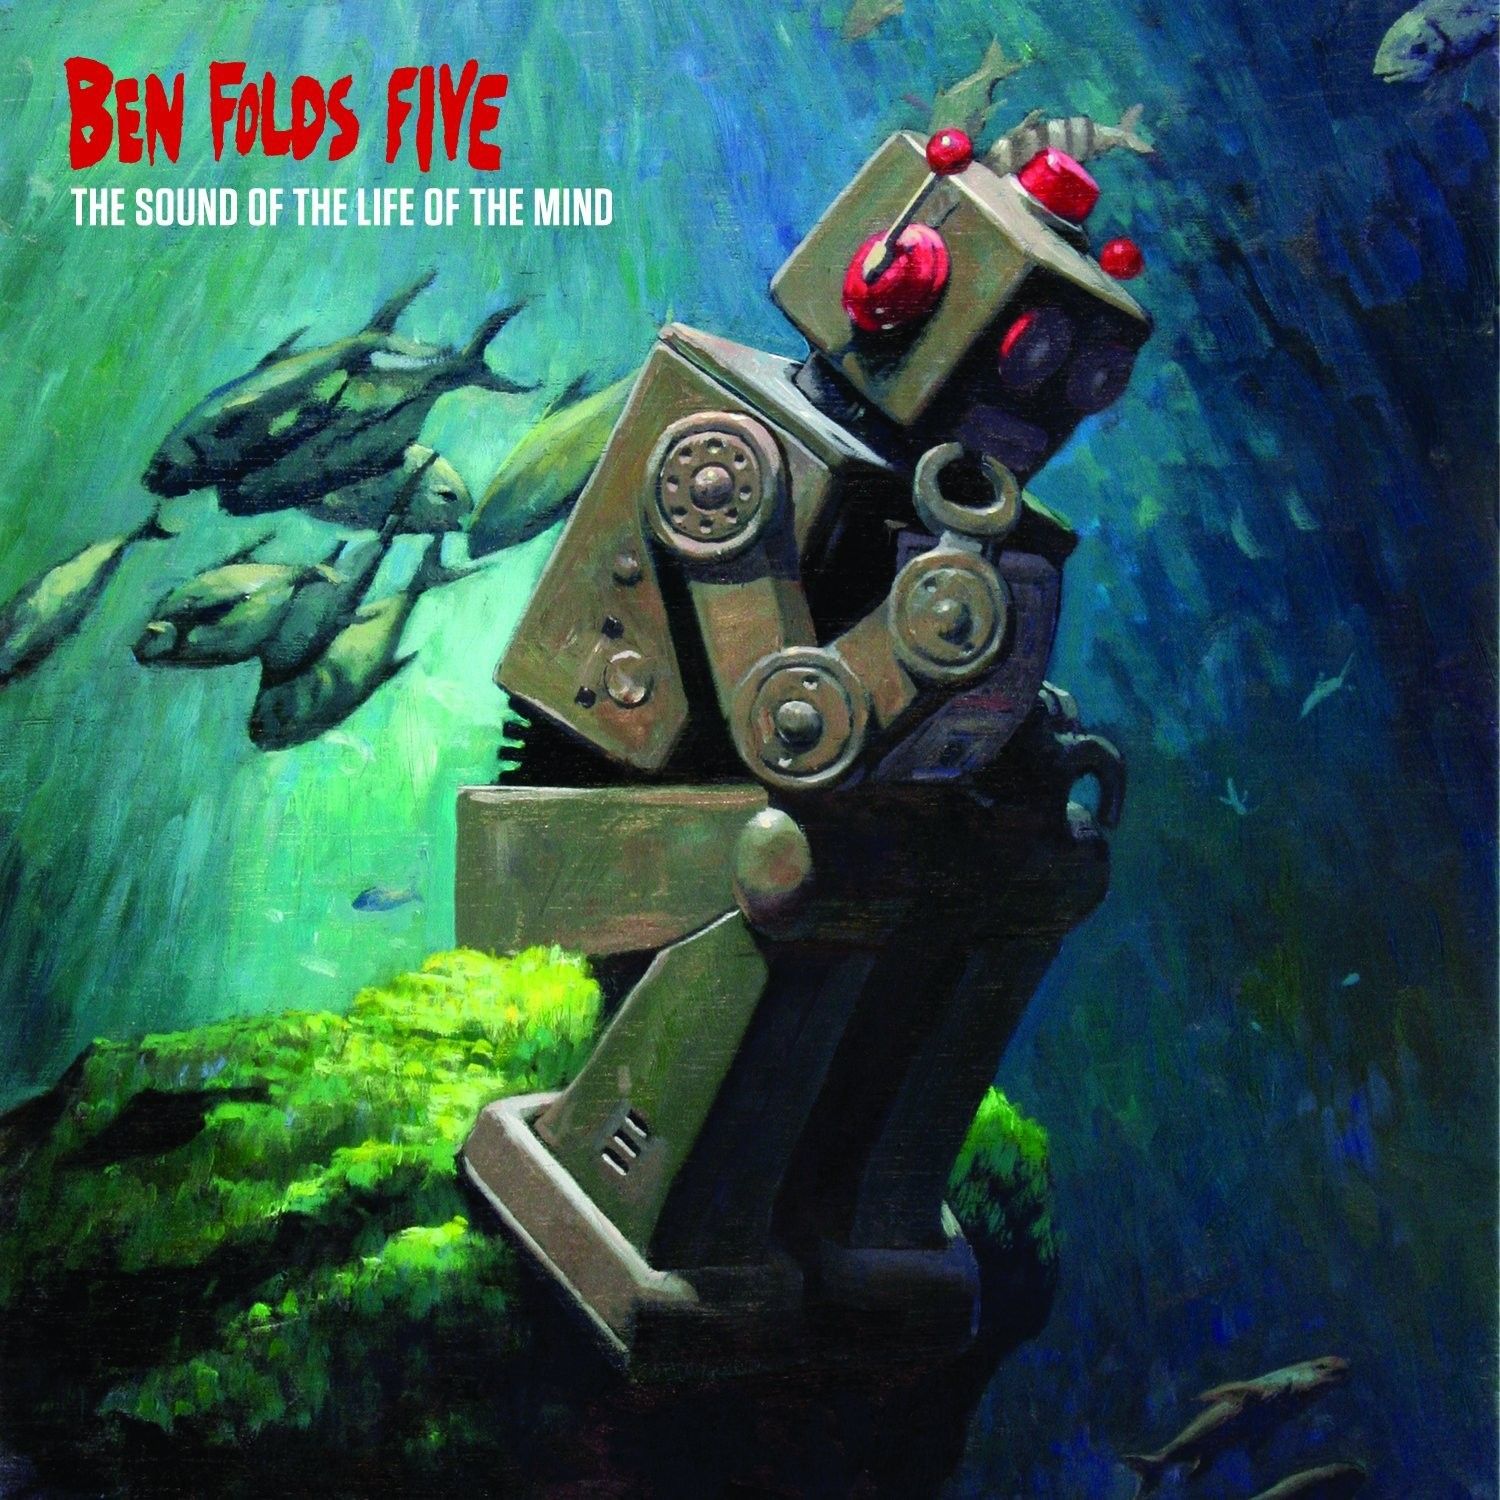 Ben Folds Five, “Hold That Thought” – Today’s Soundtrack